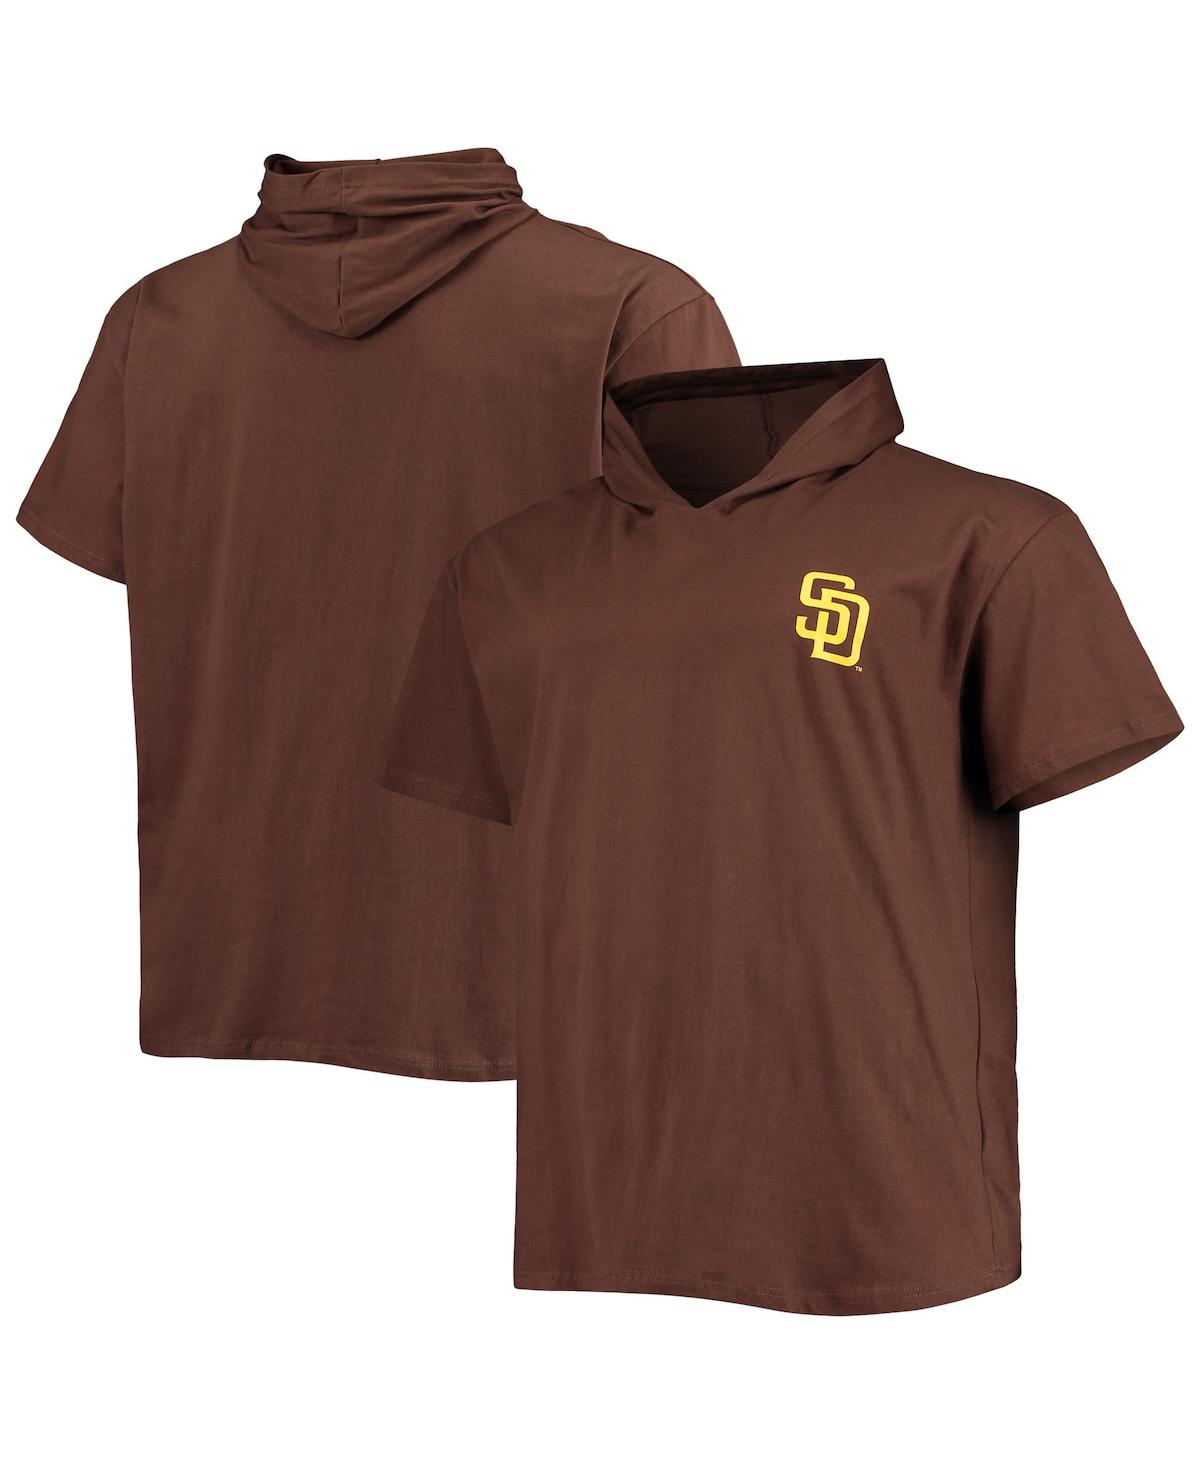 PROFILE MEN'S BROWN SAN DIEGO PADRES BIG TALL JERSEY SHORT SLEEVE PULLOVER HOODIE T-SHIRT